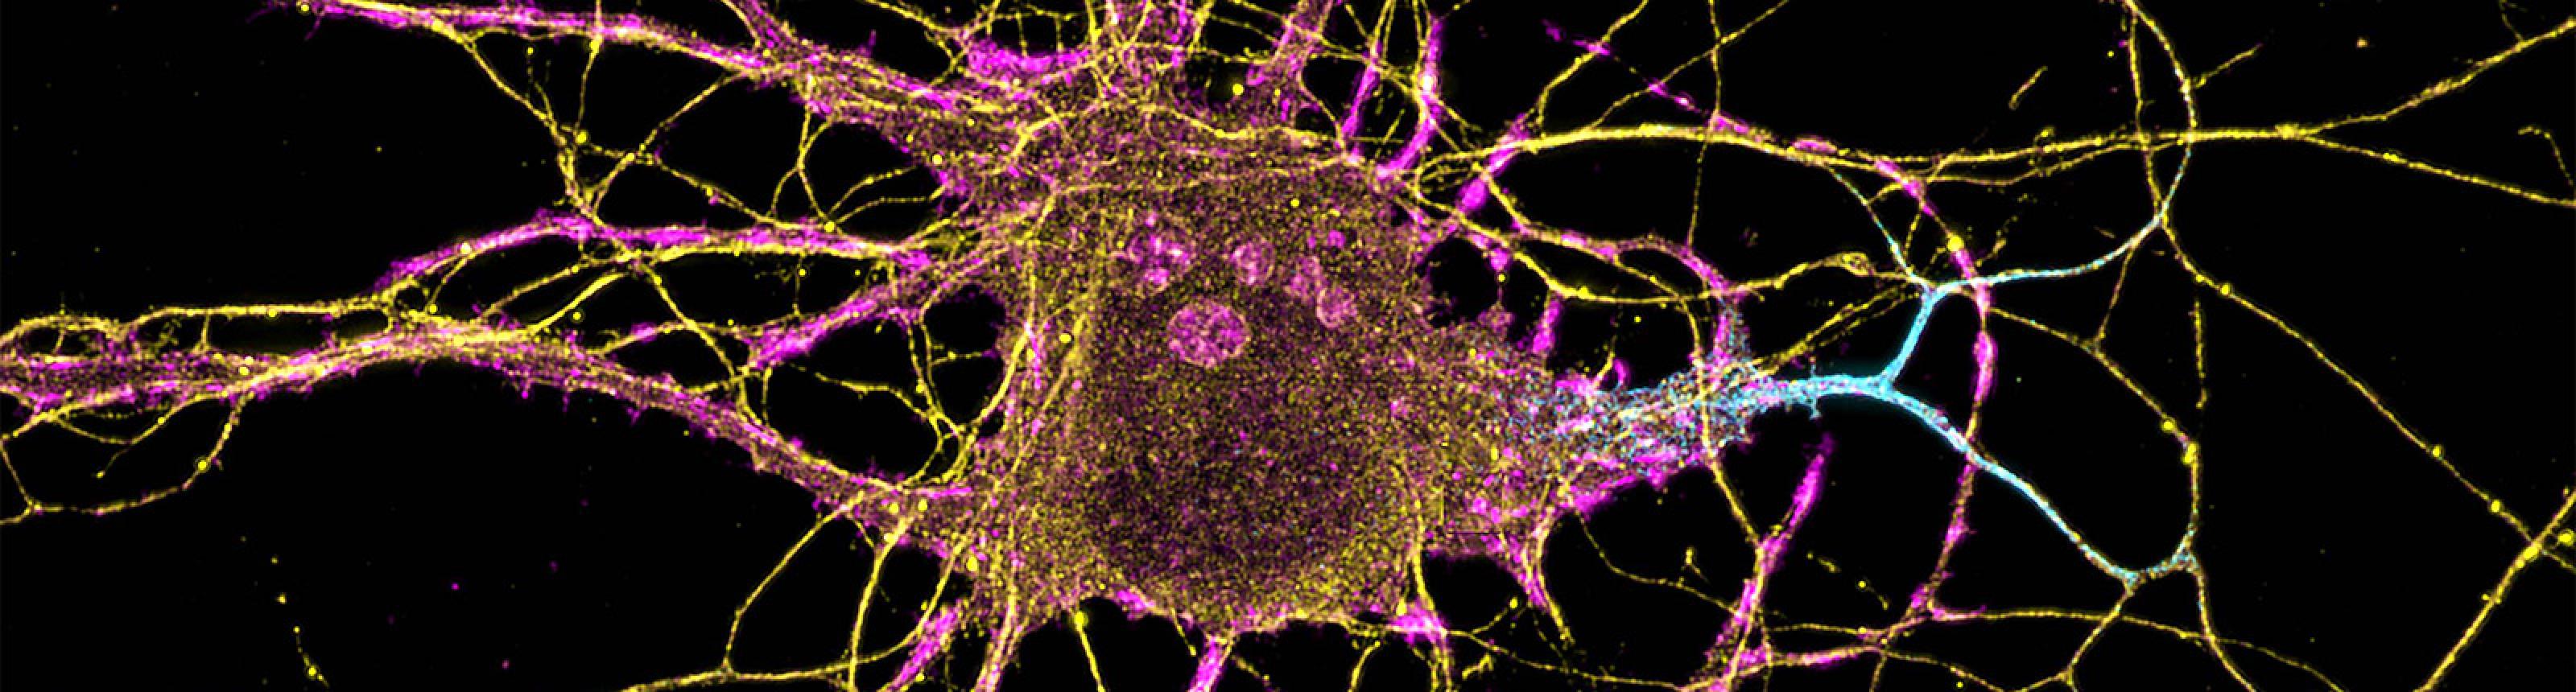 Microscopy image of a neuron. Image credit: Leterrier, NeuroCyto Lab, INP, Marseille, France.